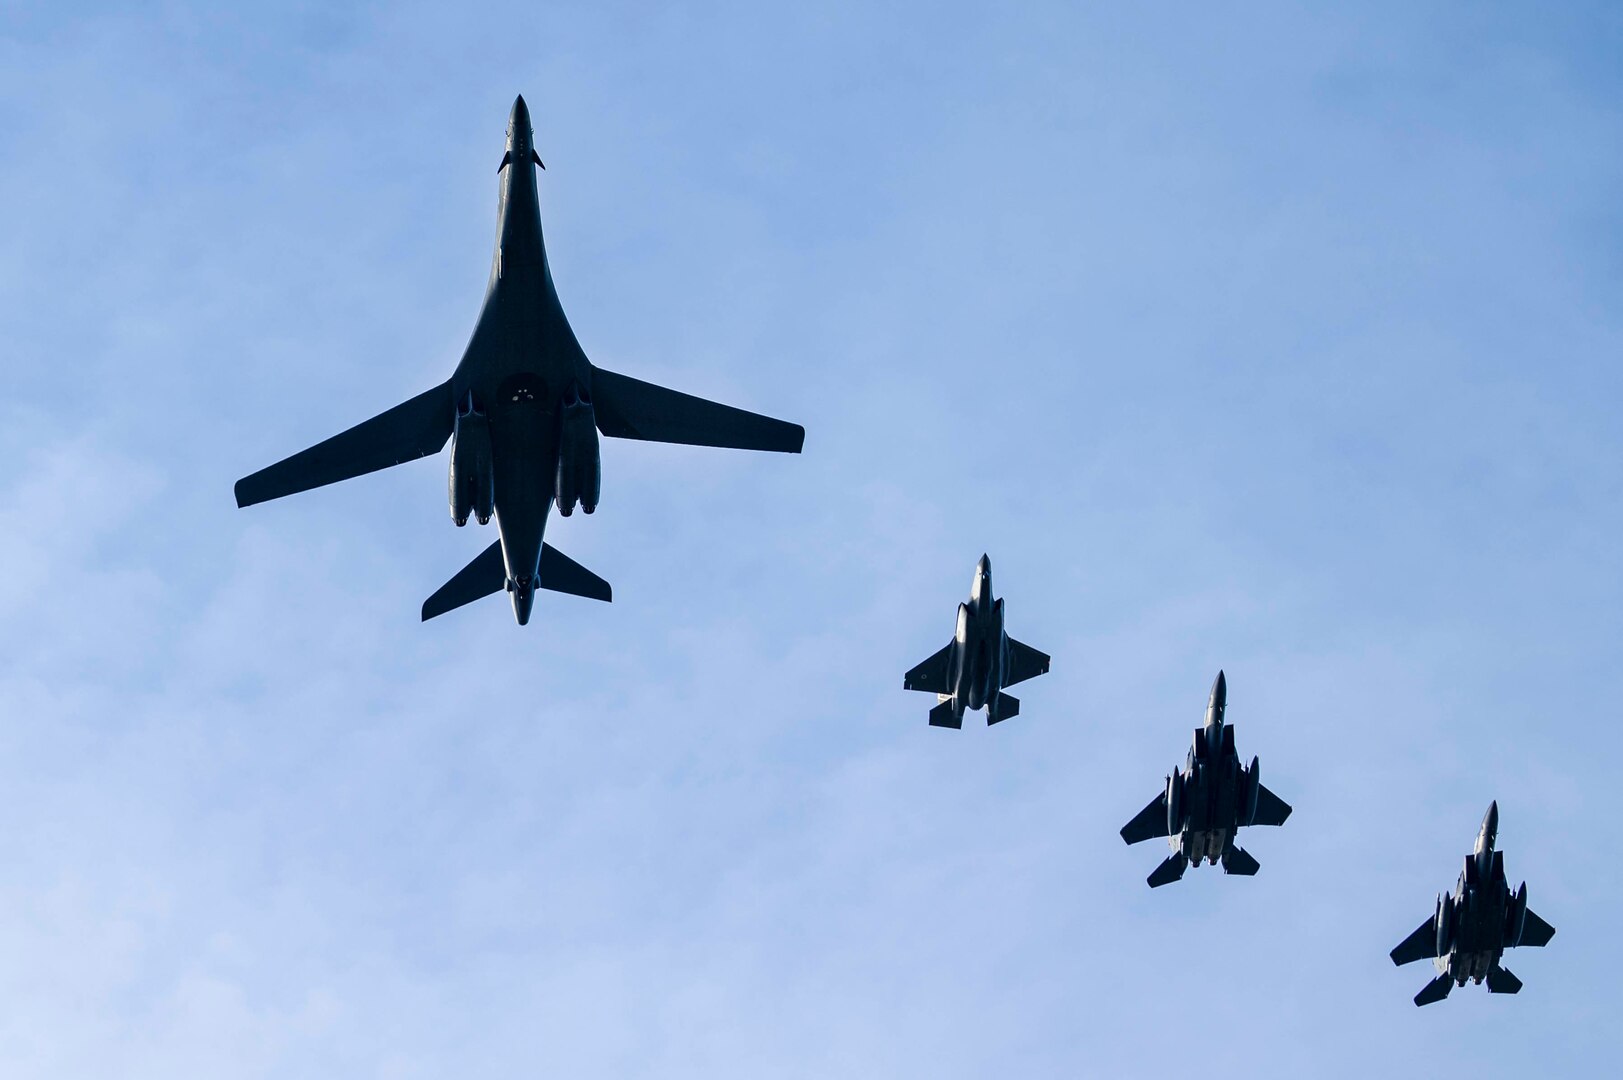 A U.S. Air Force B-1B Lancer assigned to 28th Bomb Wing and two F-15E Strike Eagles assigned to the 492nd and 494th Fighter Squadrons as well as a Royal Air Force F-35B Lightning conduct a flyover at Royal Air Force Lakenheath, England, Feb. 1, 2022.